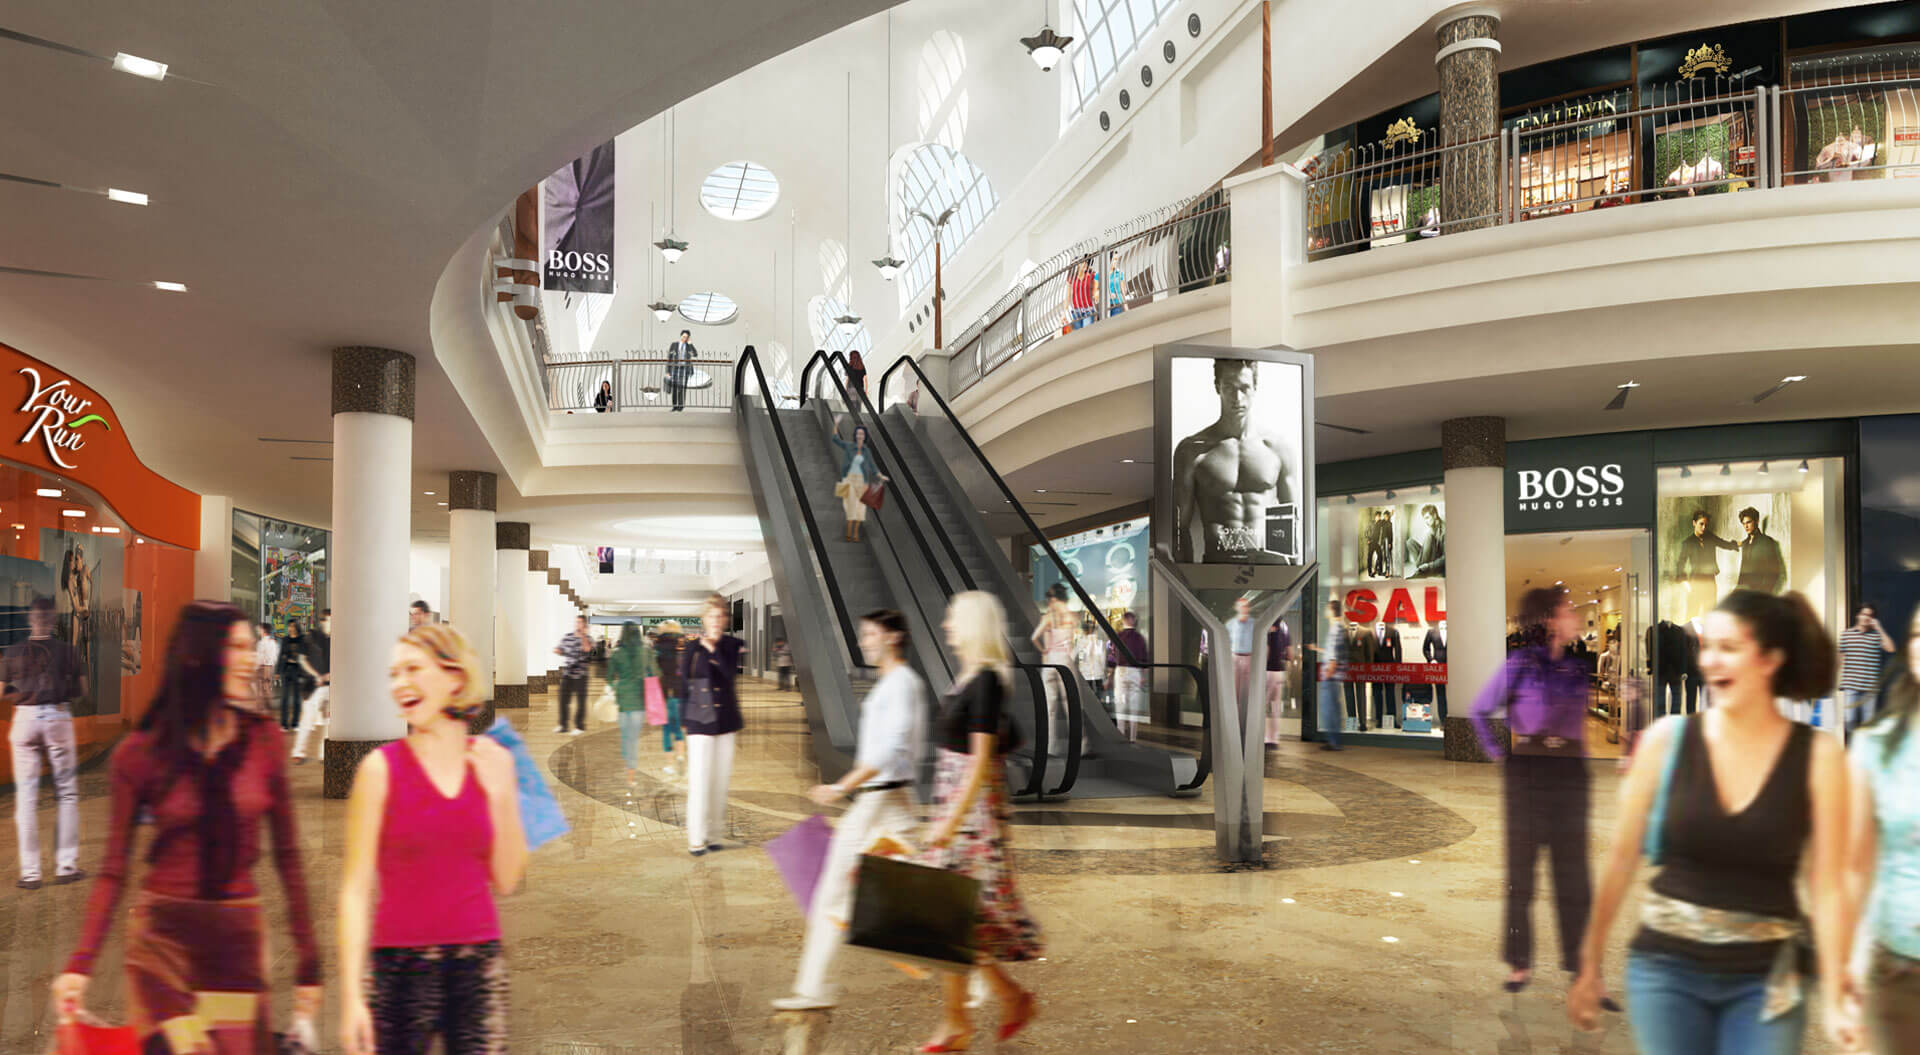 Shopping centre architecture, interior design branding, identity, brand guidelines manuals, way-finding marketing retail strategies format planning, fashion stores , restaurants, leisure and entertainment tenant mix, food court - Port City Mall Ukraine.